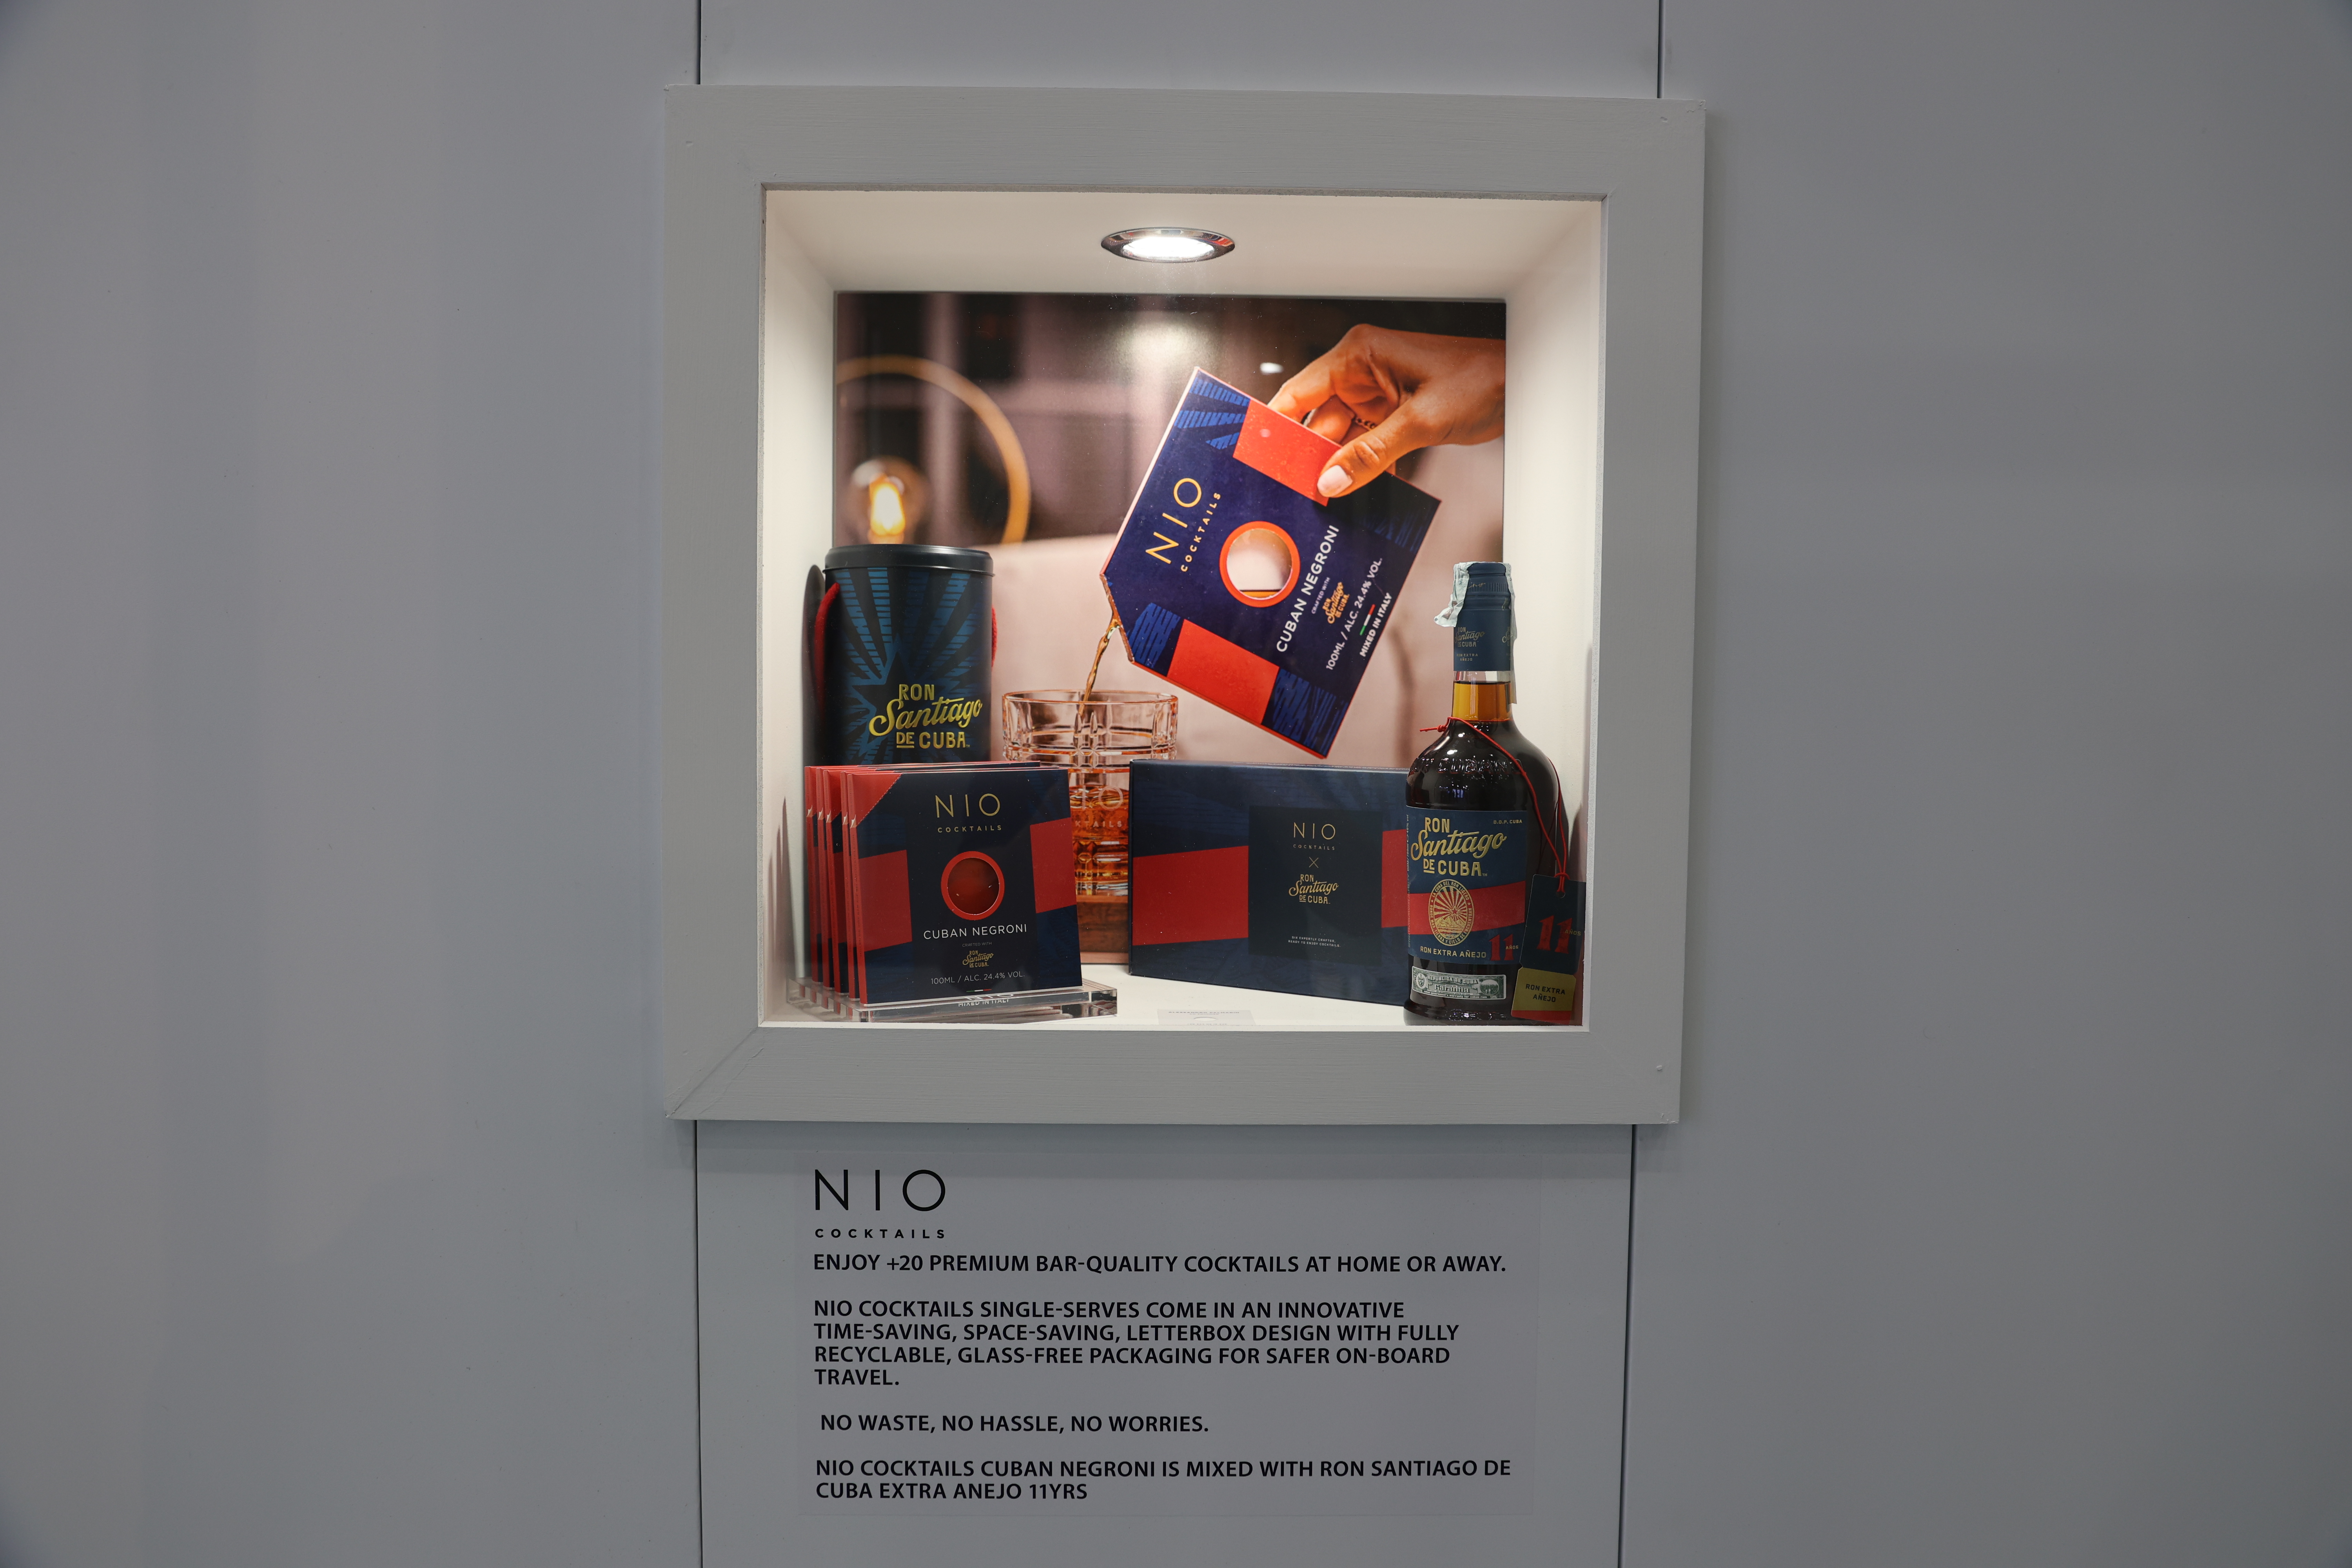 wtce whats new onboard nio cocktails glass display